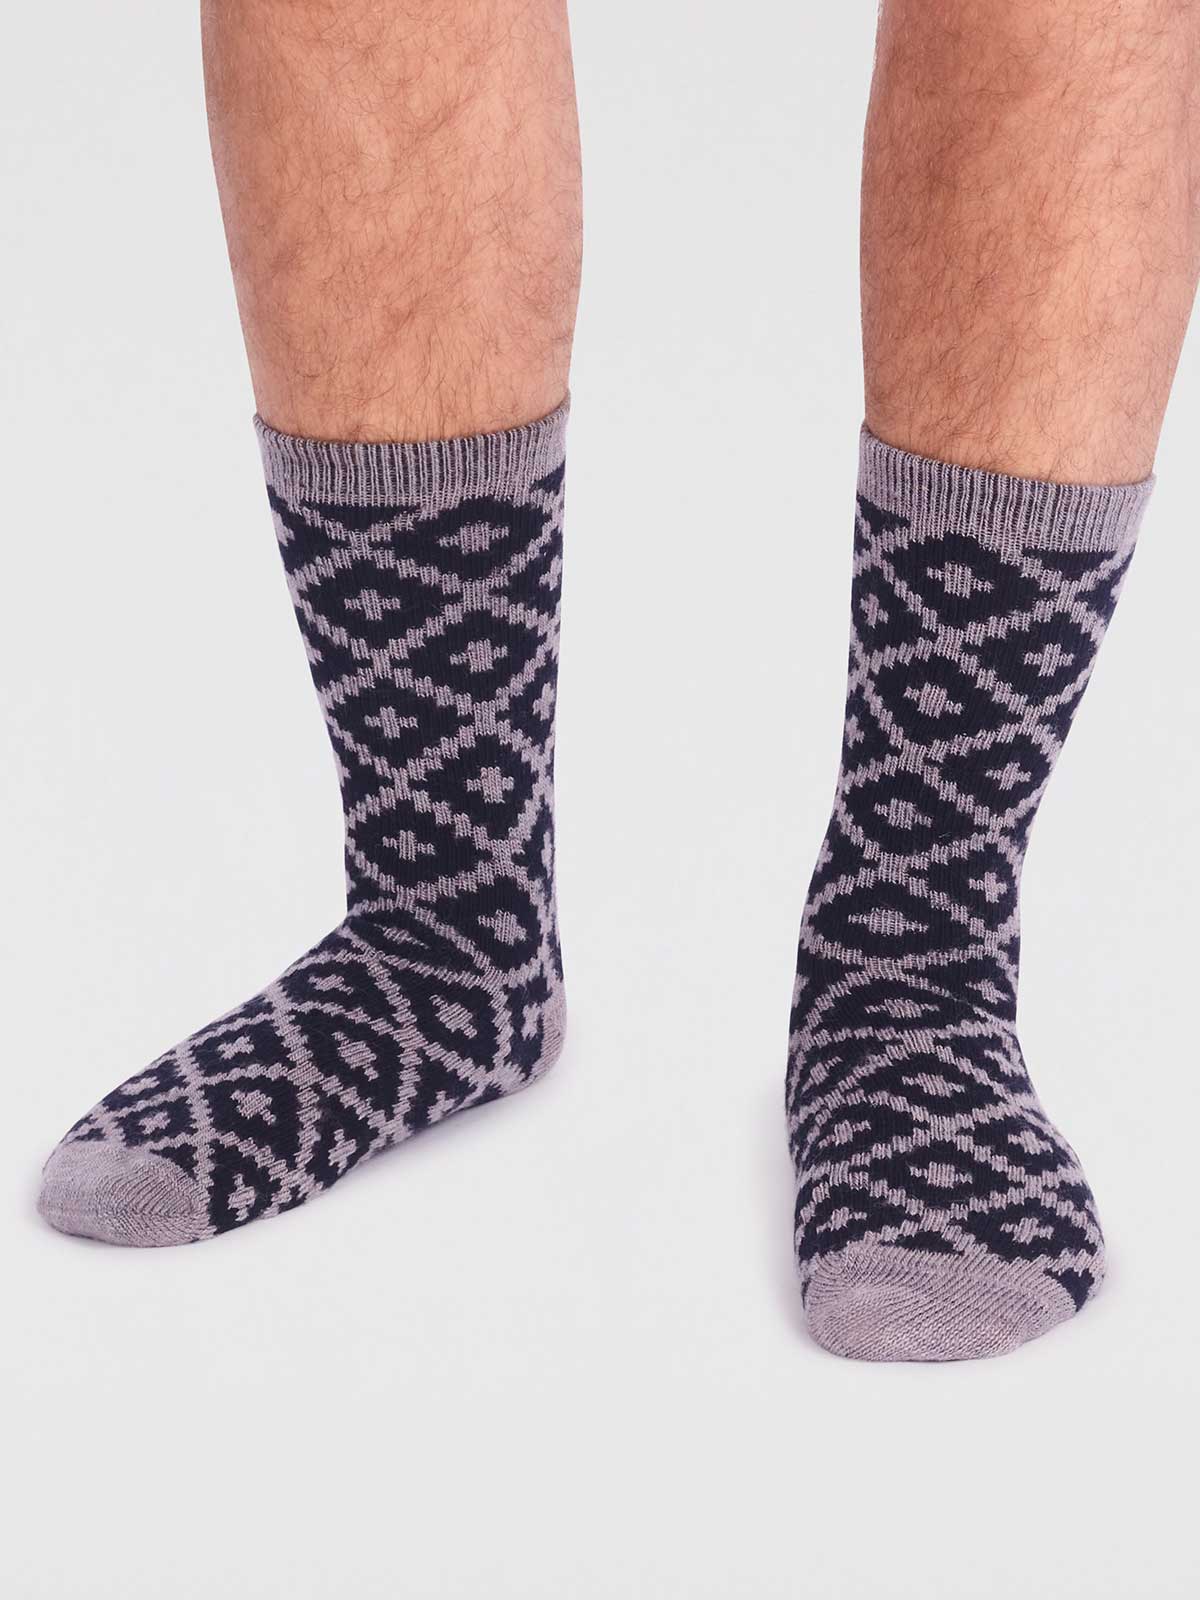 Chaussettes Grady-Thought-SPM816-Mid Grey Marle-2 (1)